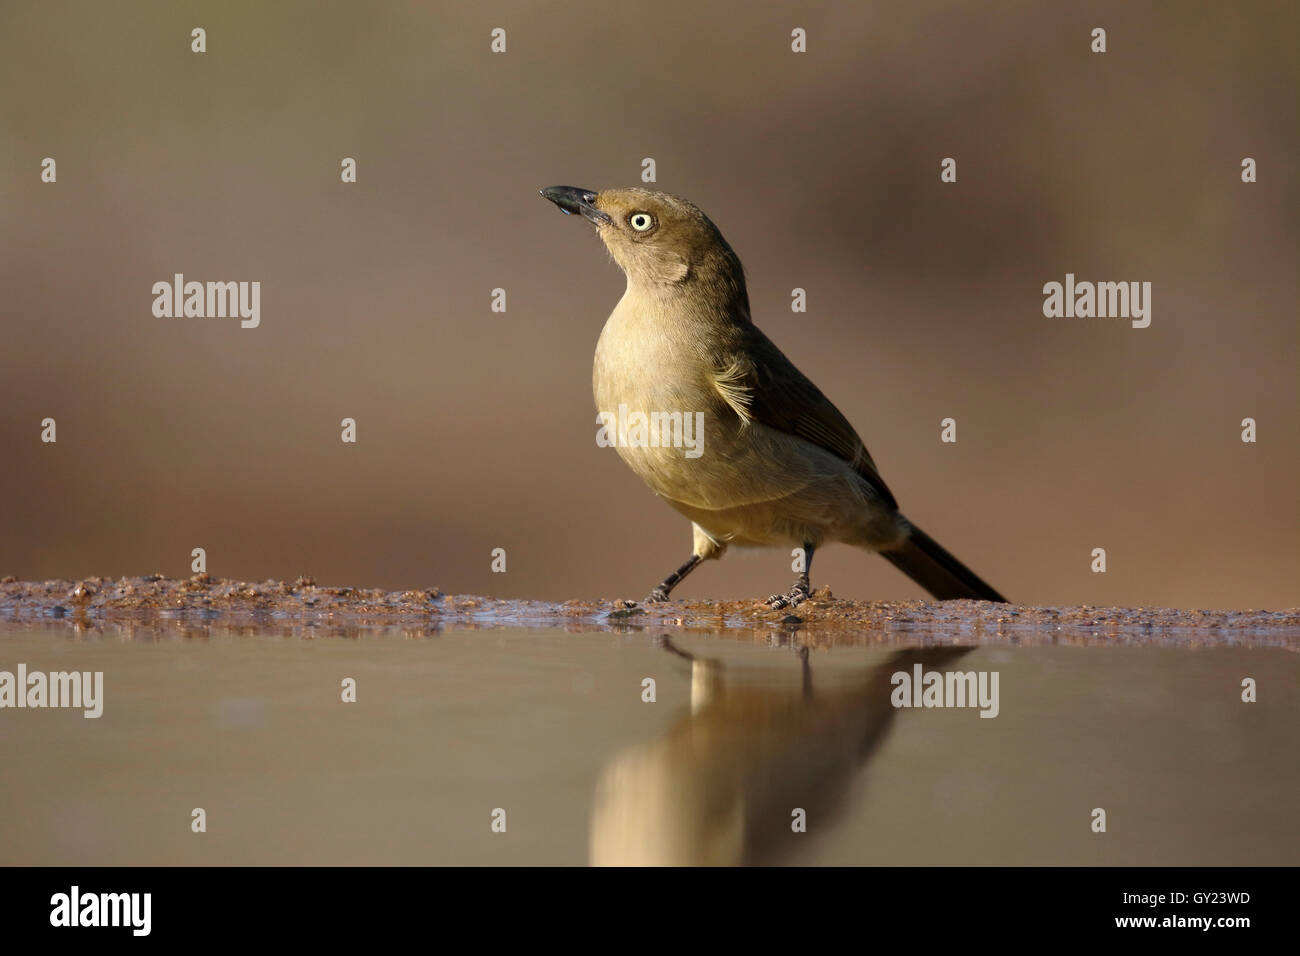 Sombre greenbul, Andropadus importunus, single bird by water, South Africa, August 2016 Stock Photo